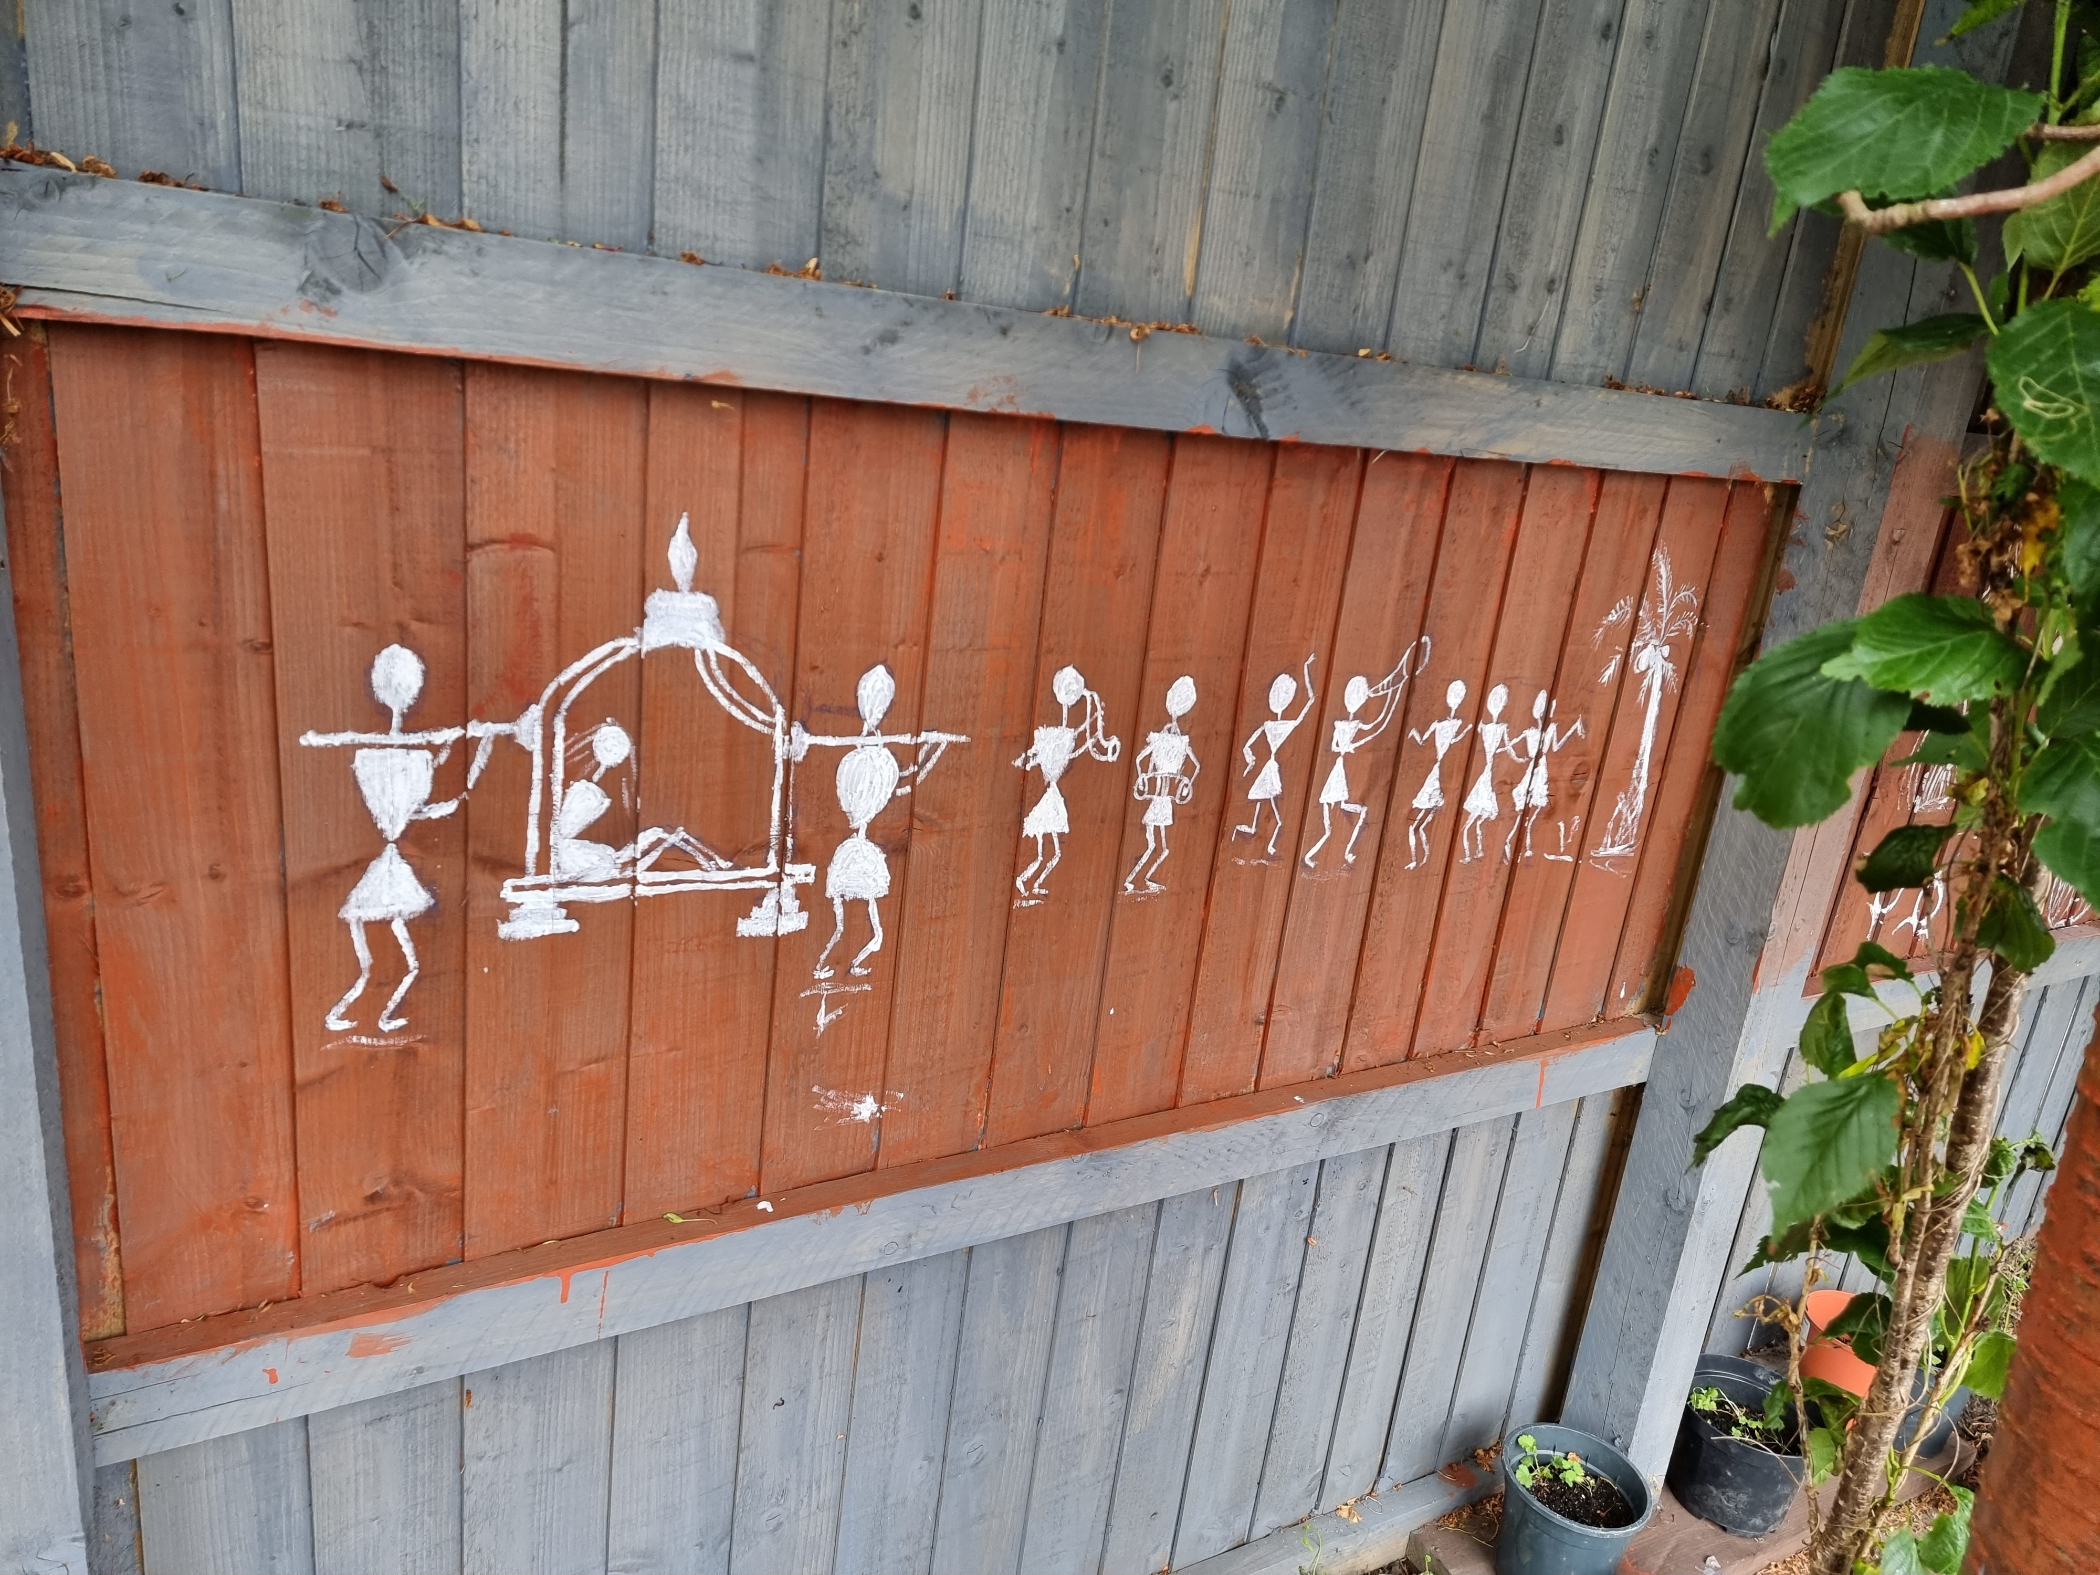 Painting on fence of white stick people